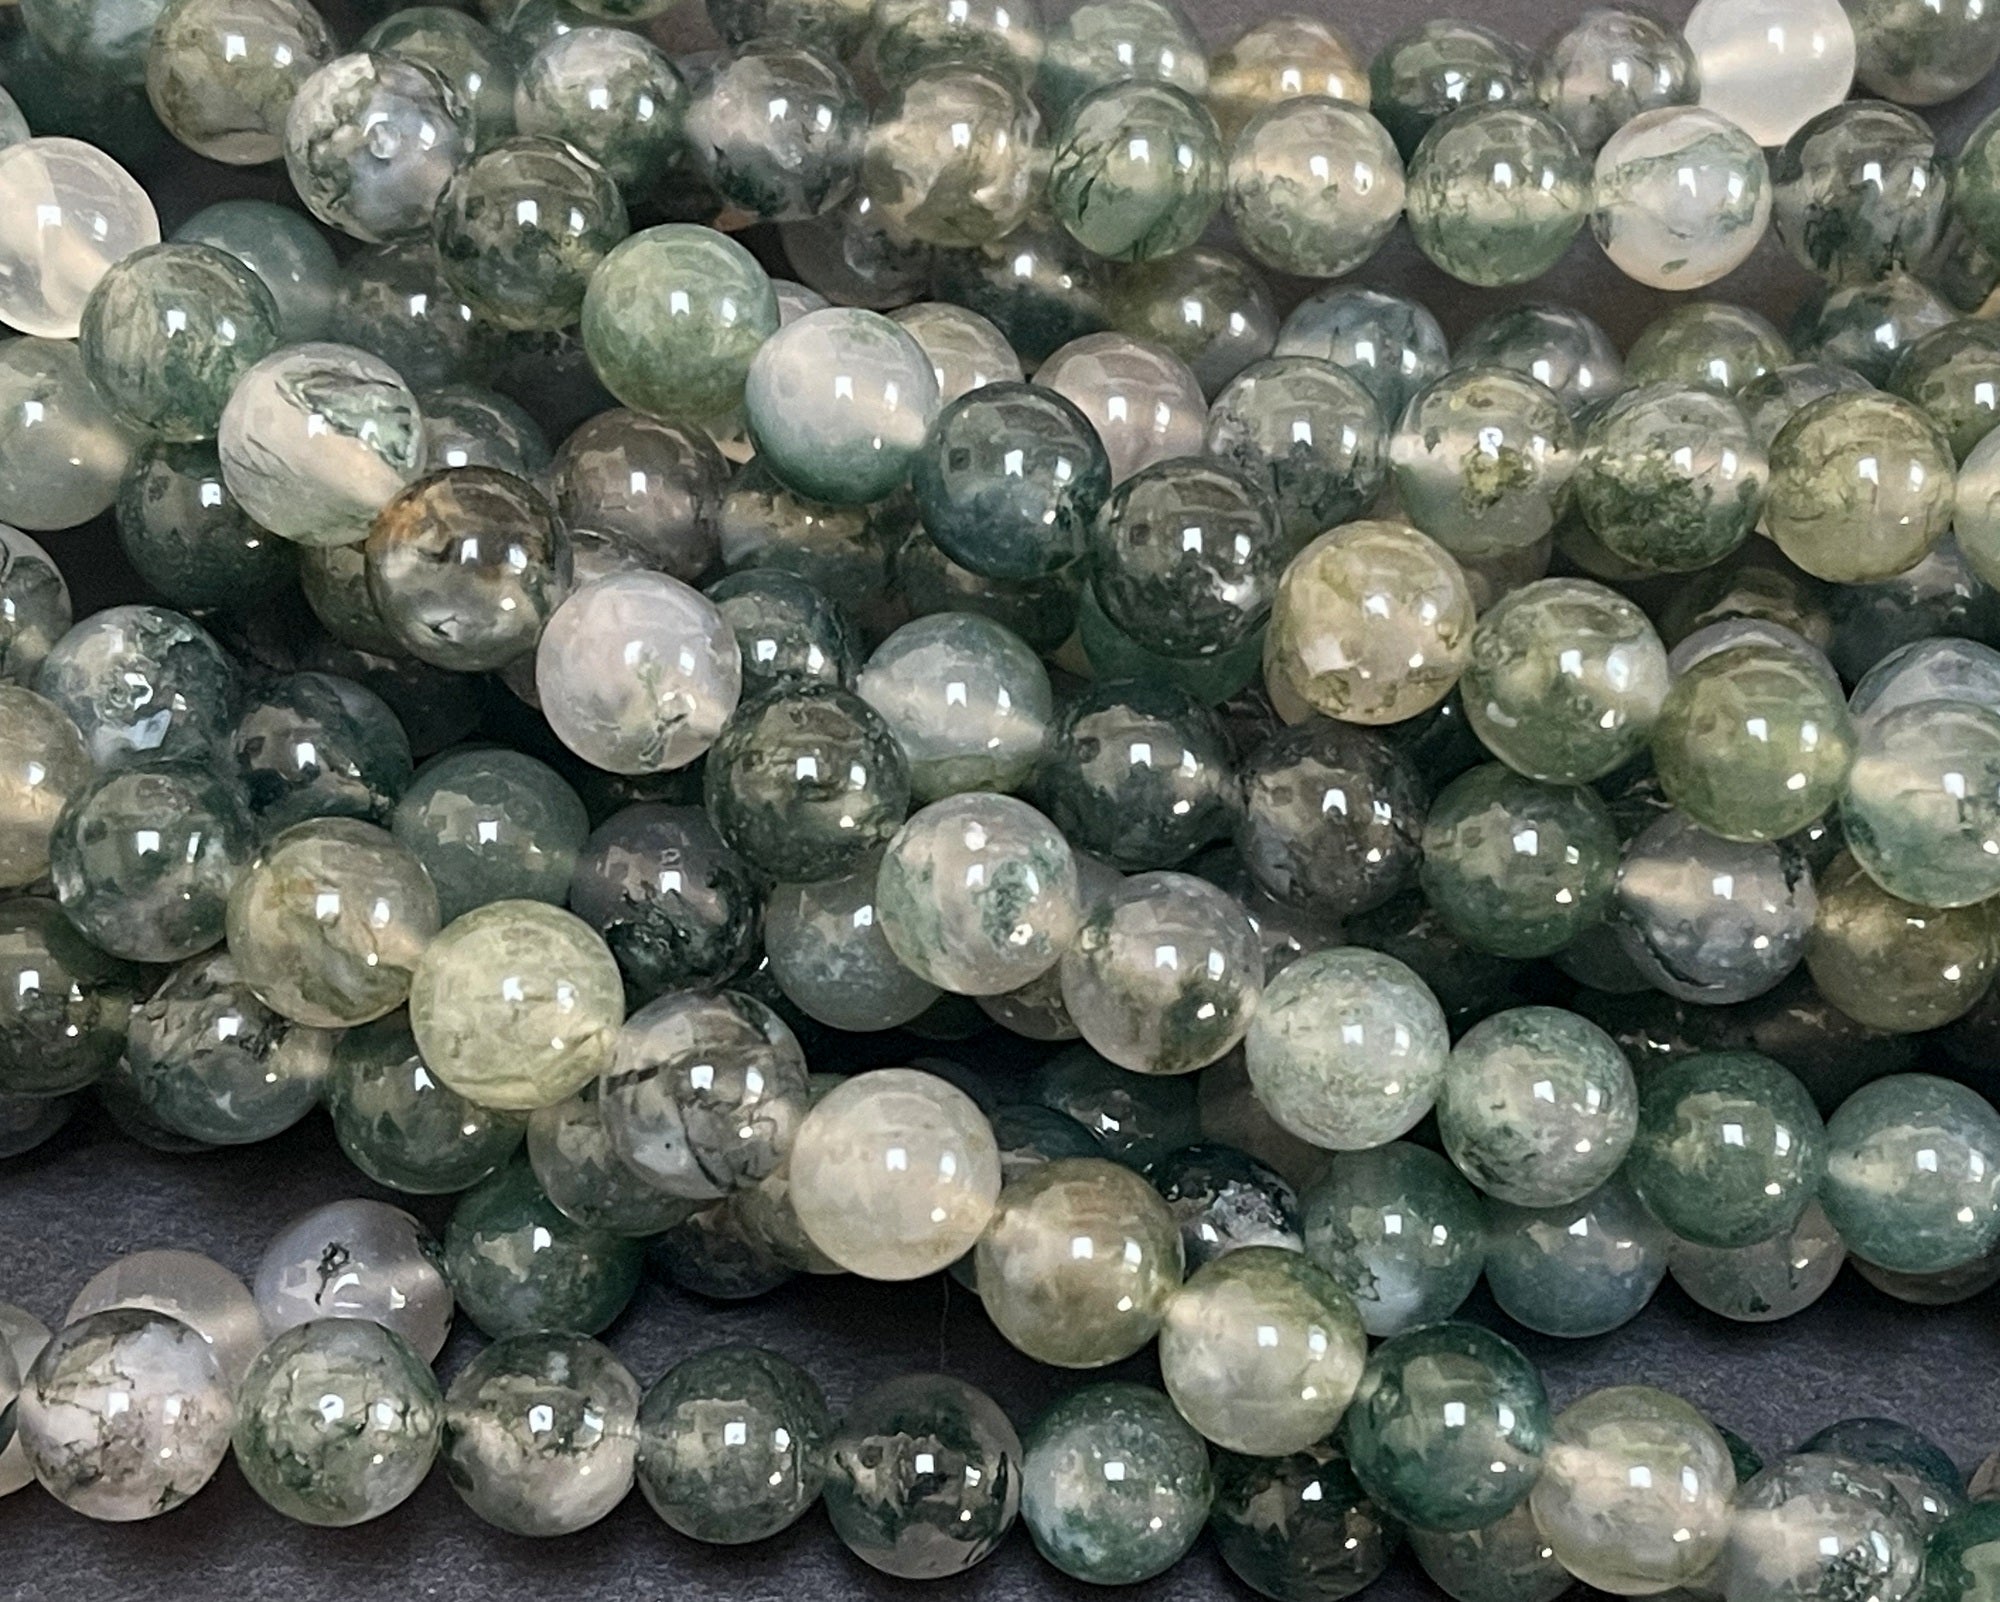 Dendritic Moss Agate 8mm round natural gemstone beads 15.5" strand